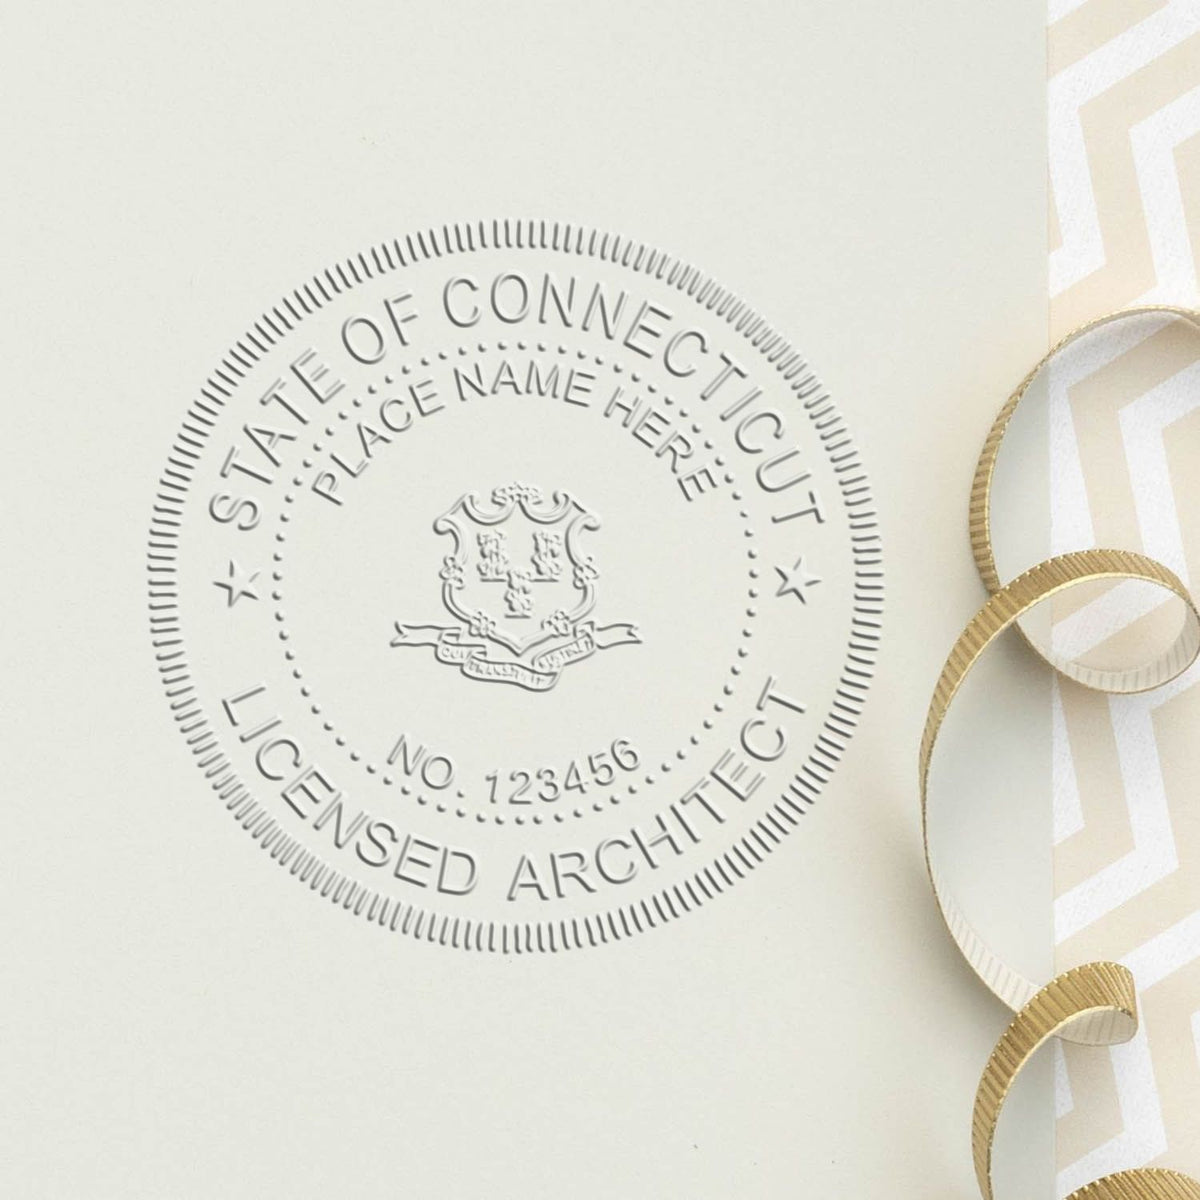 A photograph of the Hybrid Connecticut Architect Seal stamp impression reveals a vivid, professional image of the on paper.